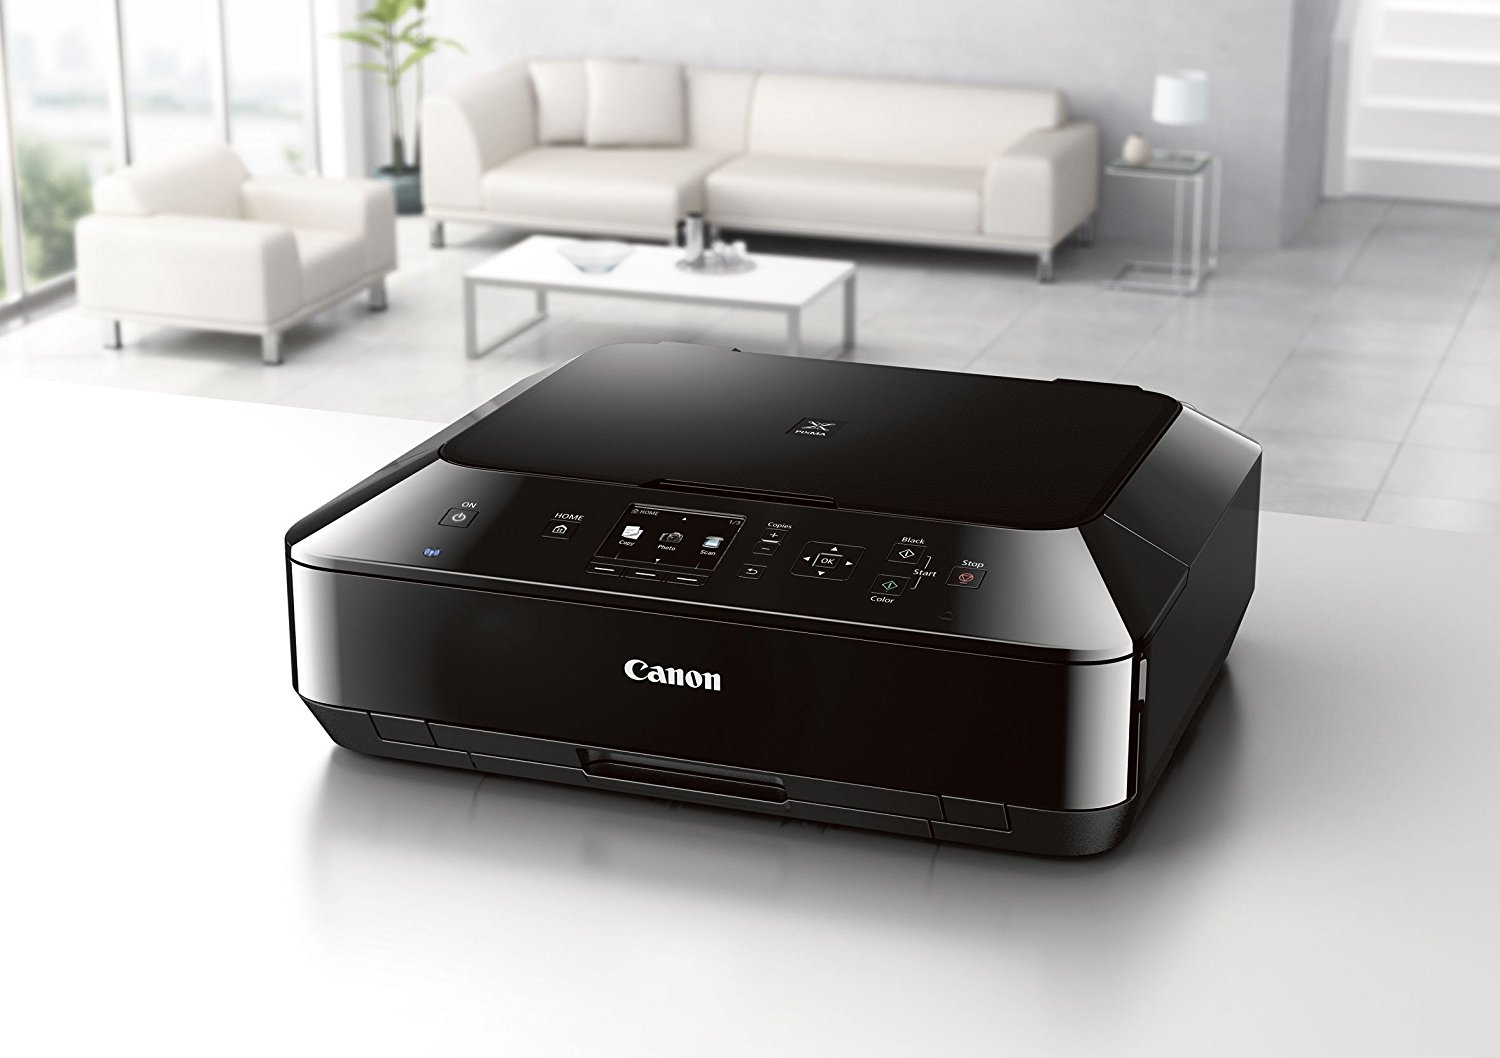 Canon Pixma Mg5420 Wireless Color Photo Printer Discontinued By Manufacturer N6 Free Image 6448